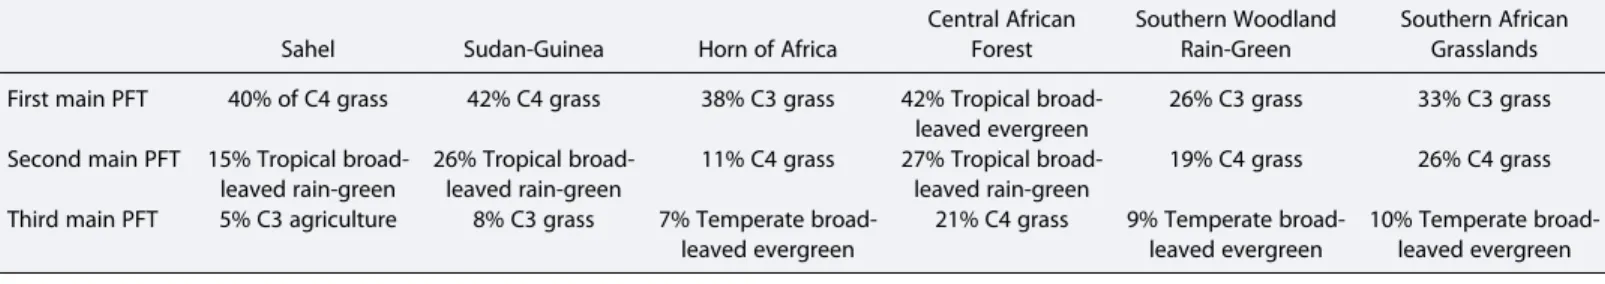 Table 2. Proportion (%) of the Three Dominant Plant Functional Types (PFTs) Within Each African Eco-climatic Sub-region Considered in This Study